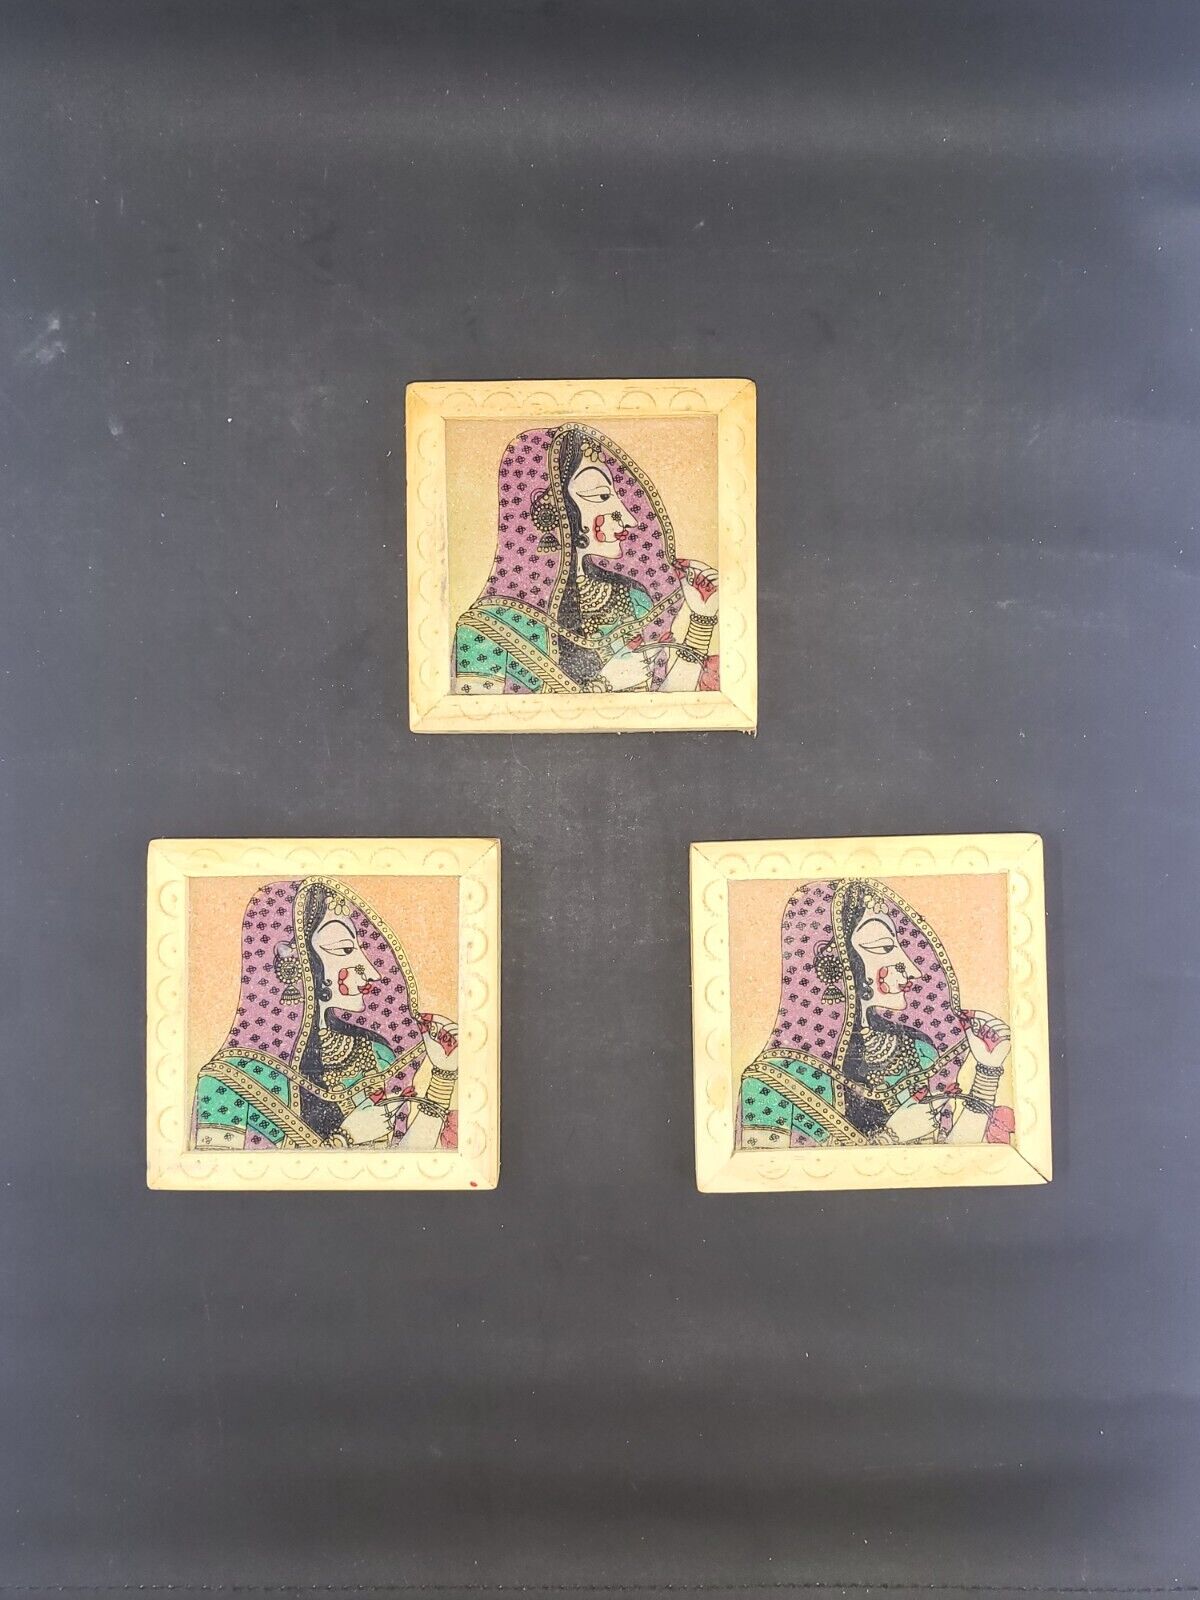  3 Small Colorful & Detailed Paintings of Middle Eastern Woman in Wood